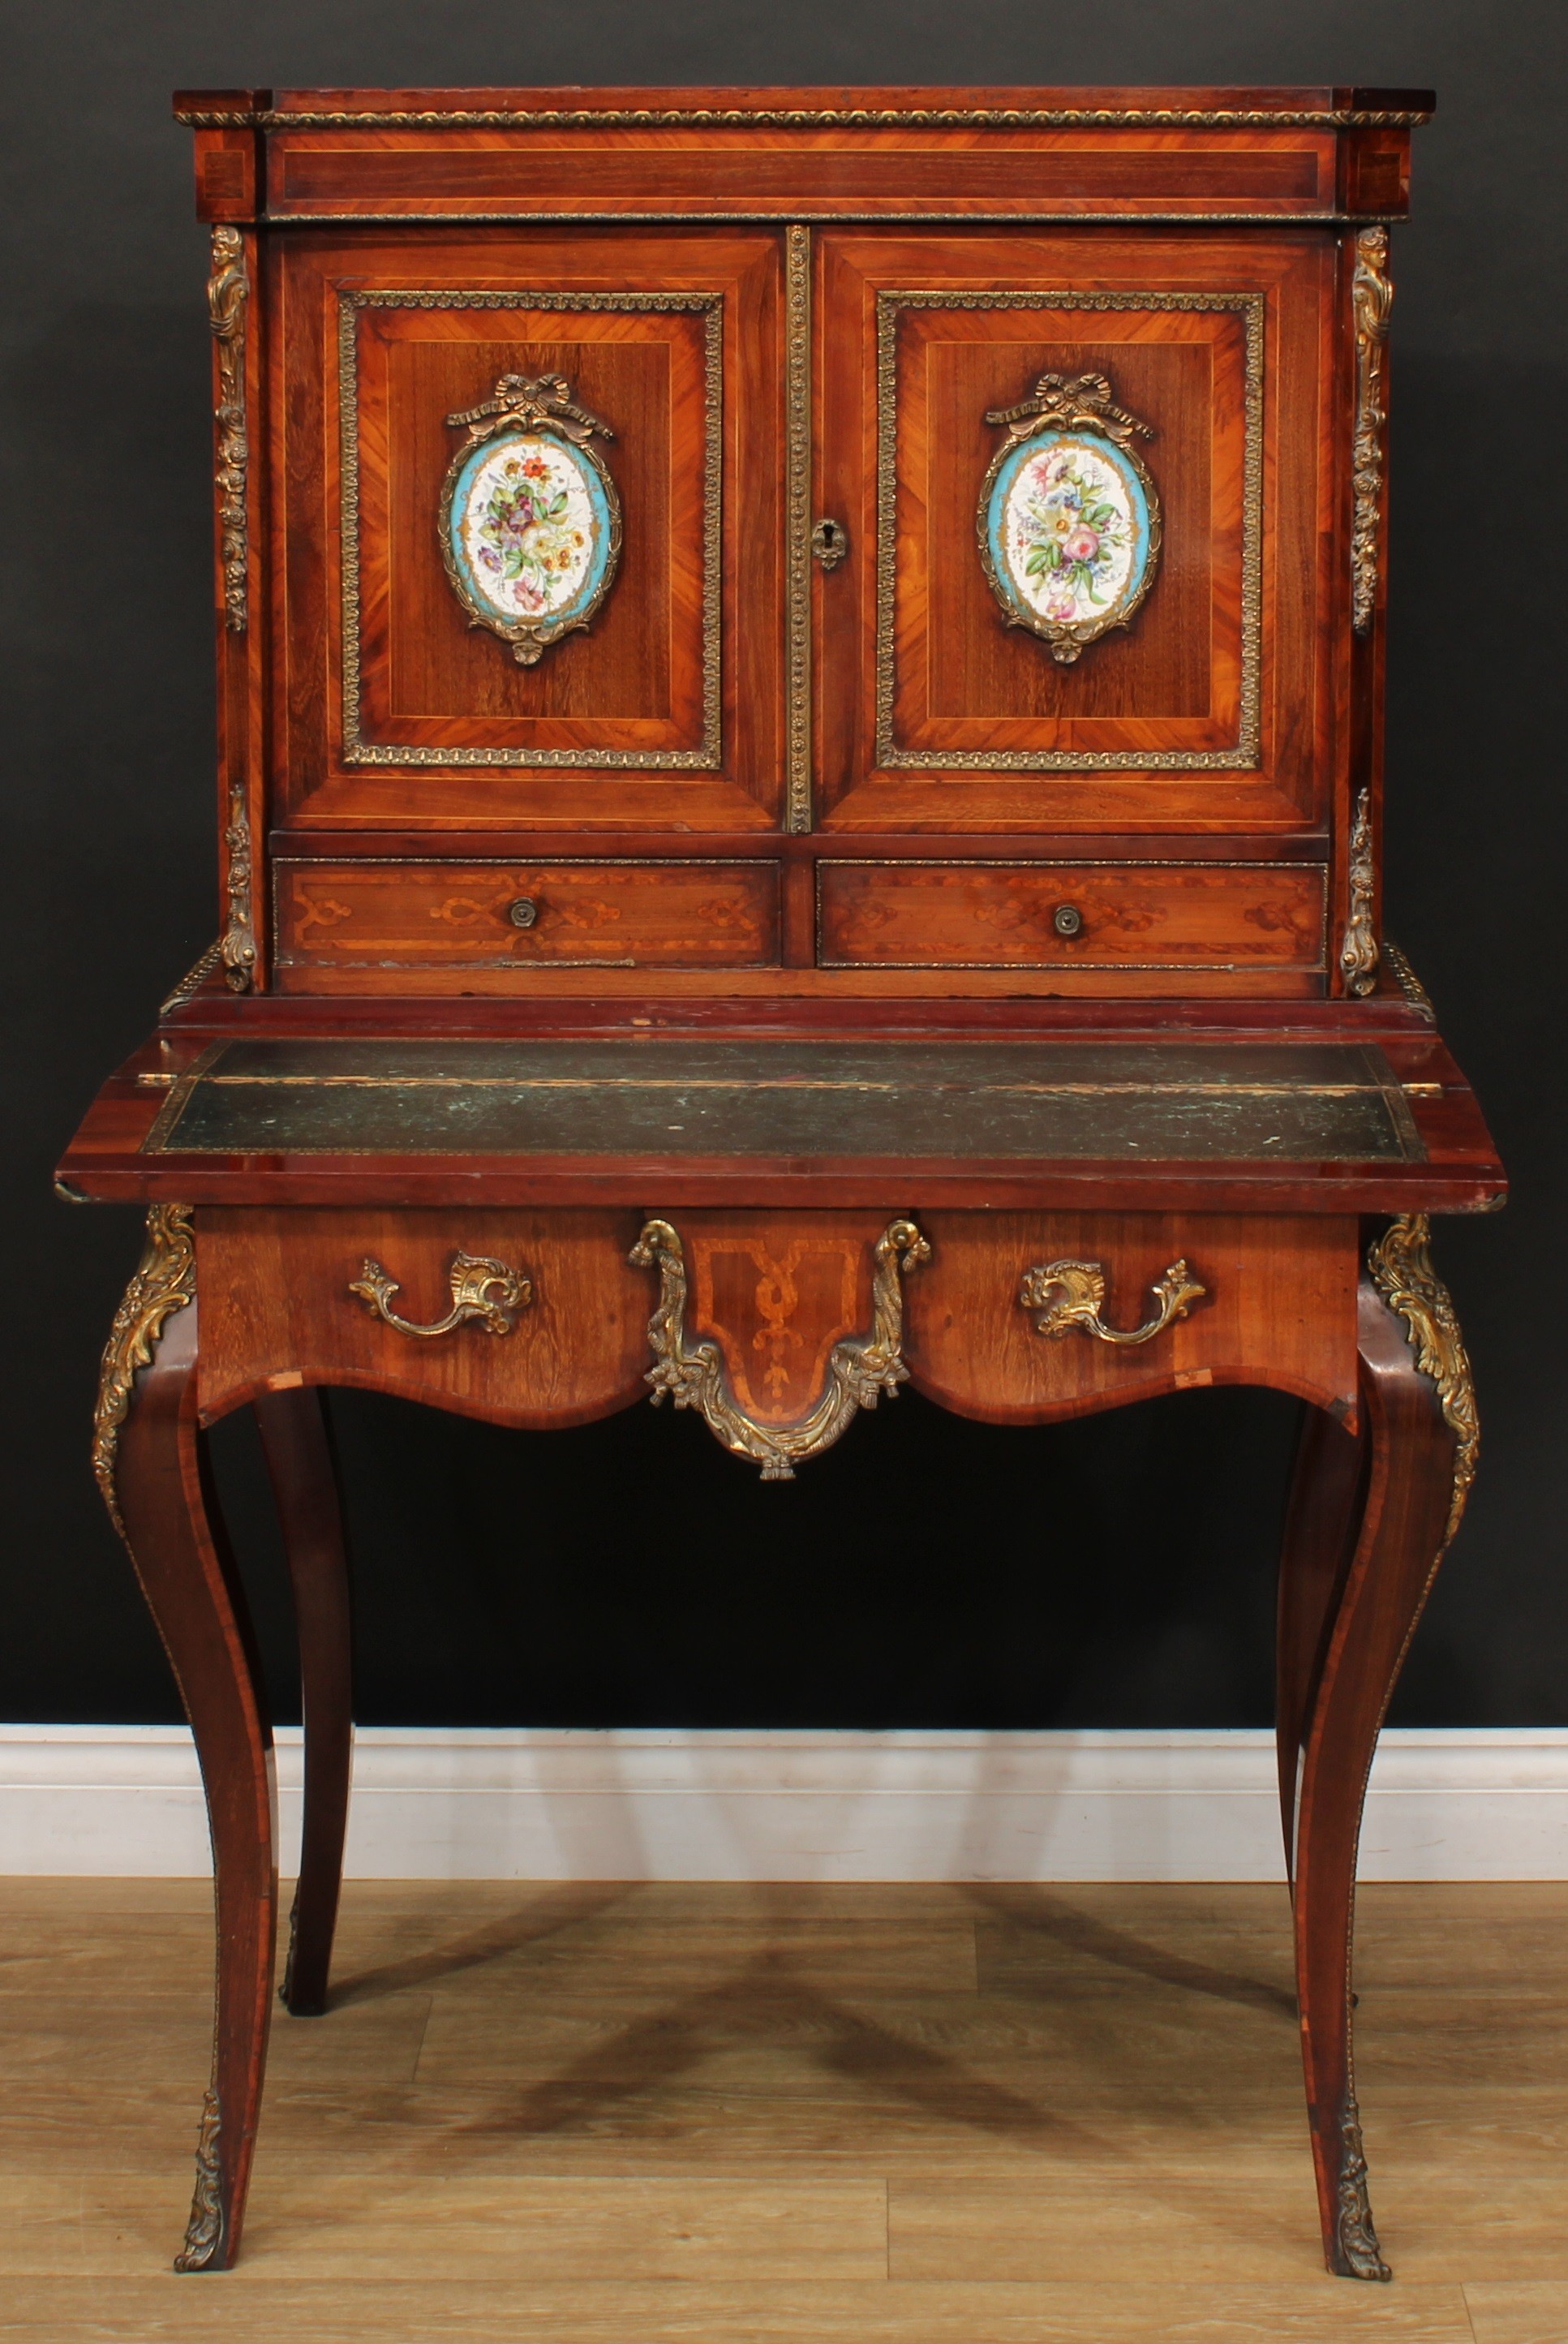 A 19th century porcelain and gilt metal mounted kingwood banded and marquetry bonheur du jour, - Image 2 of 7